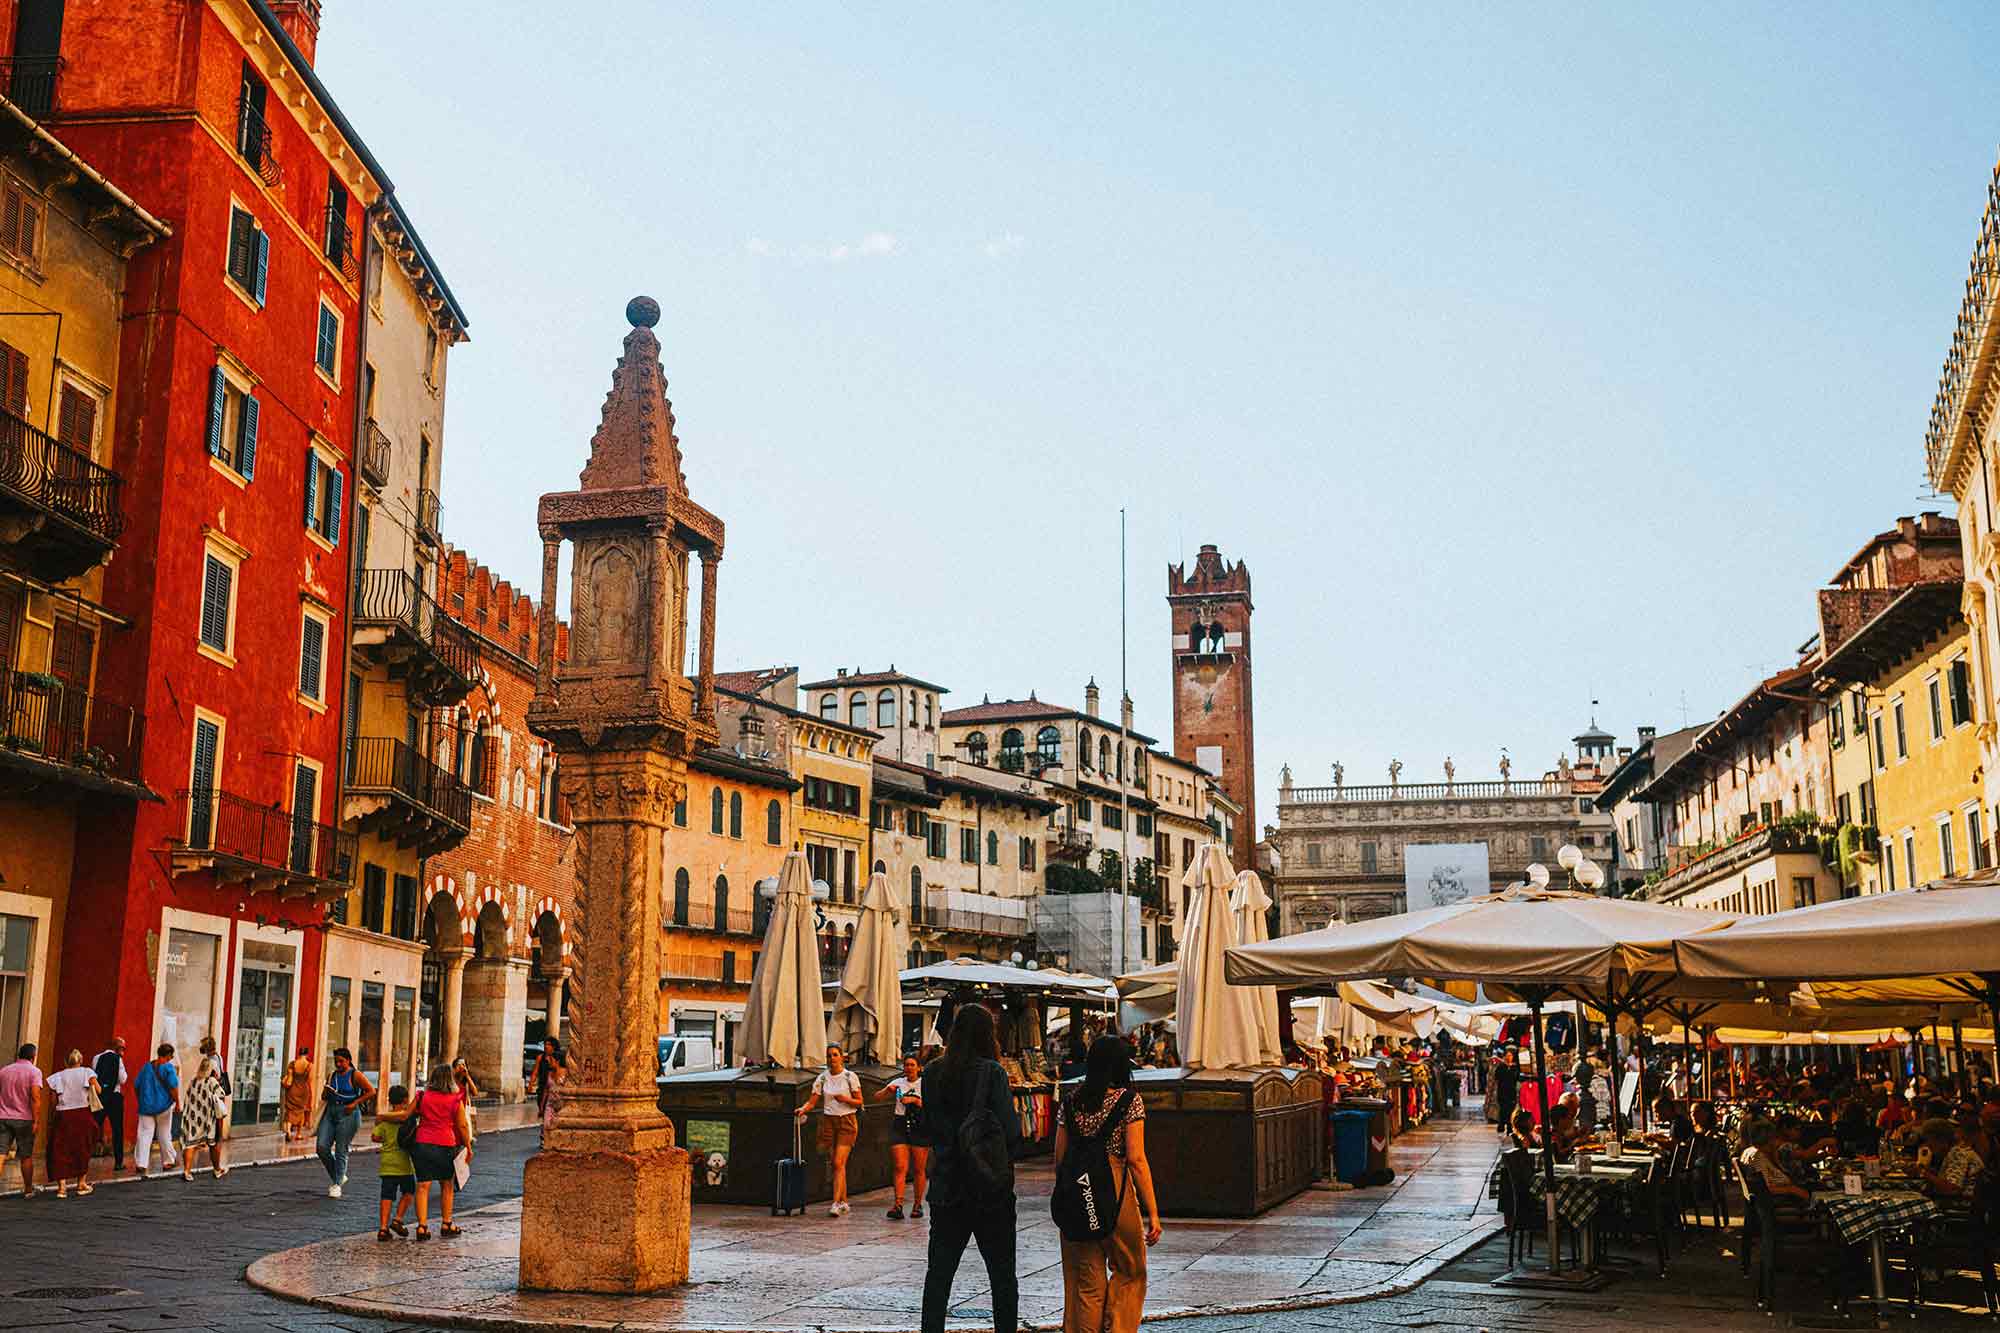 Image of Piazza delle Erbe in Verona, with people strolling